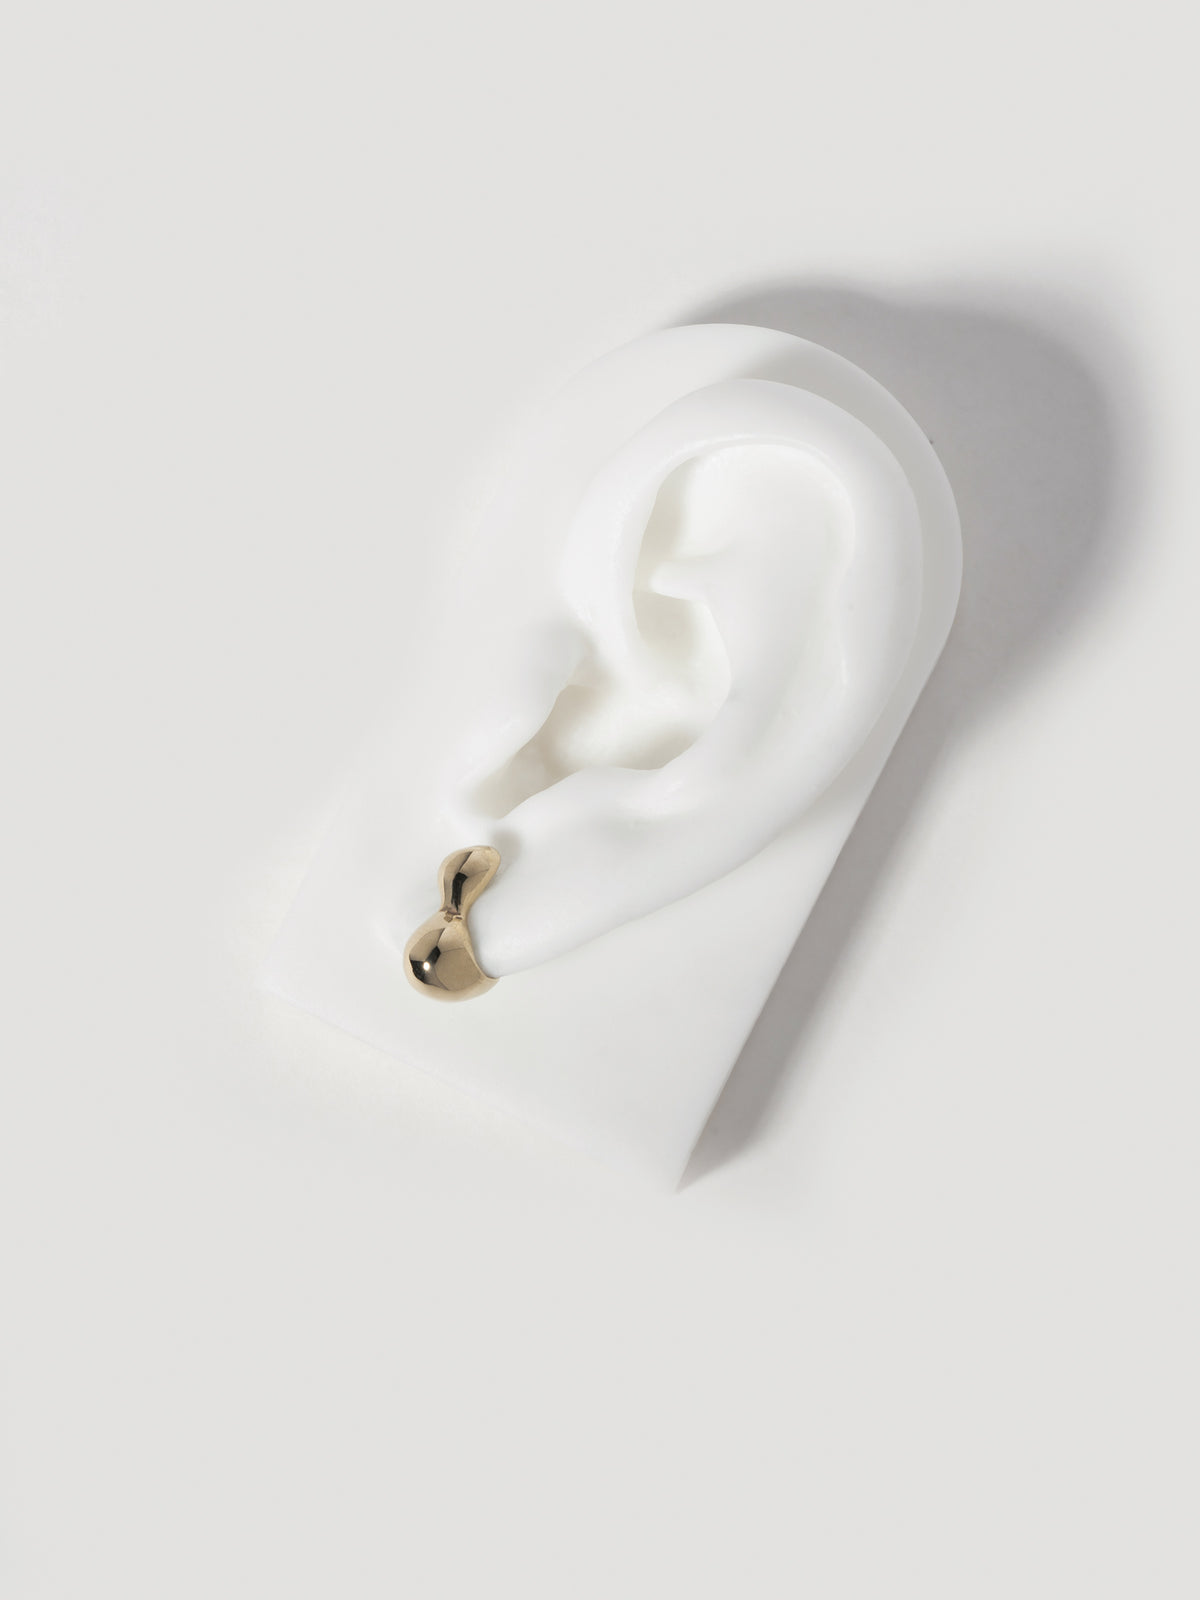 Product image of FARIS CHAMELLE Stud in 14k Gold, shown on white silicon ear display.